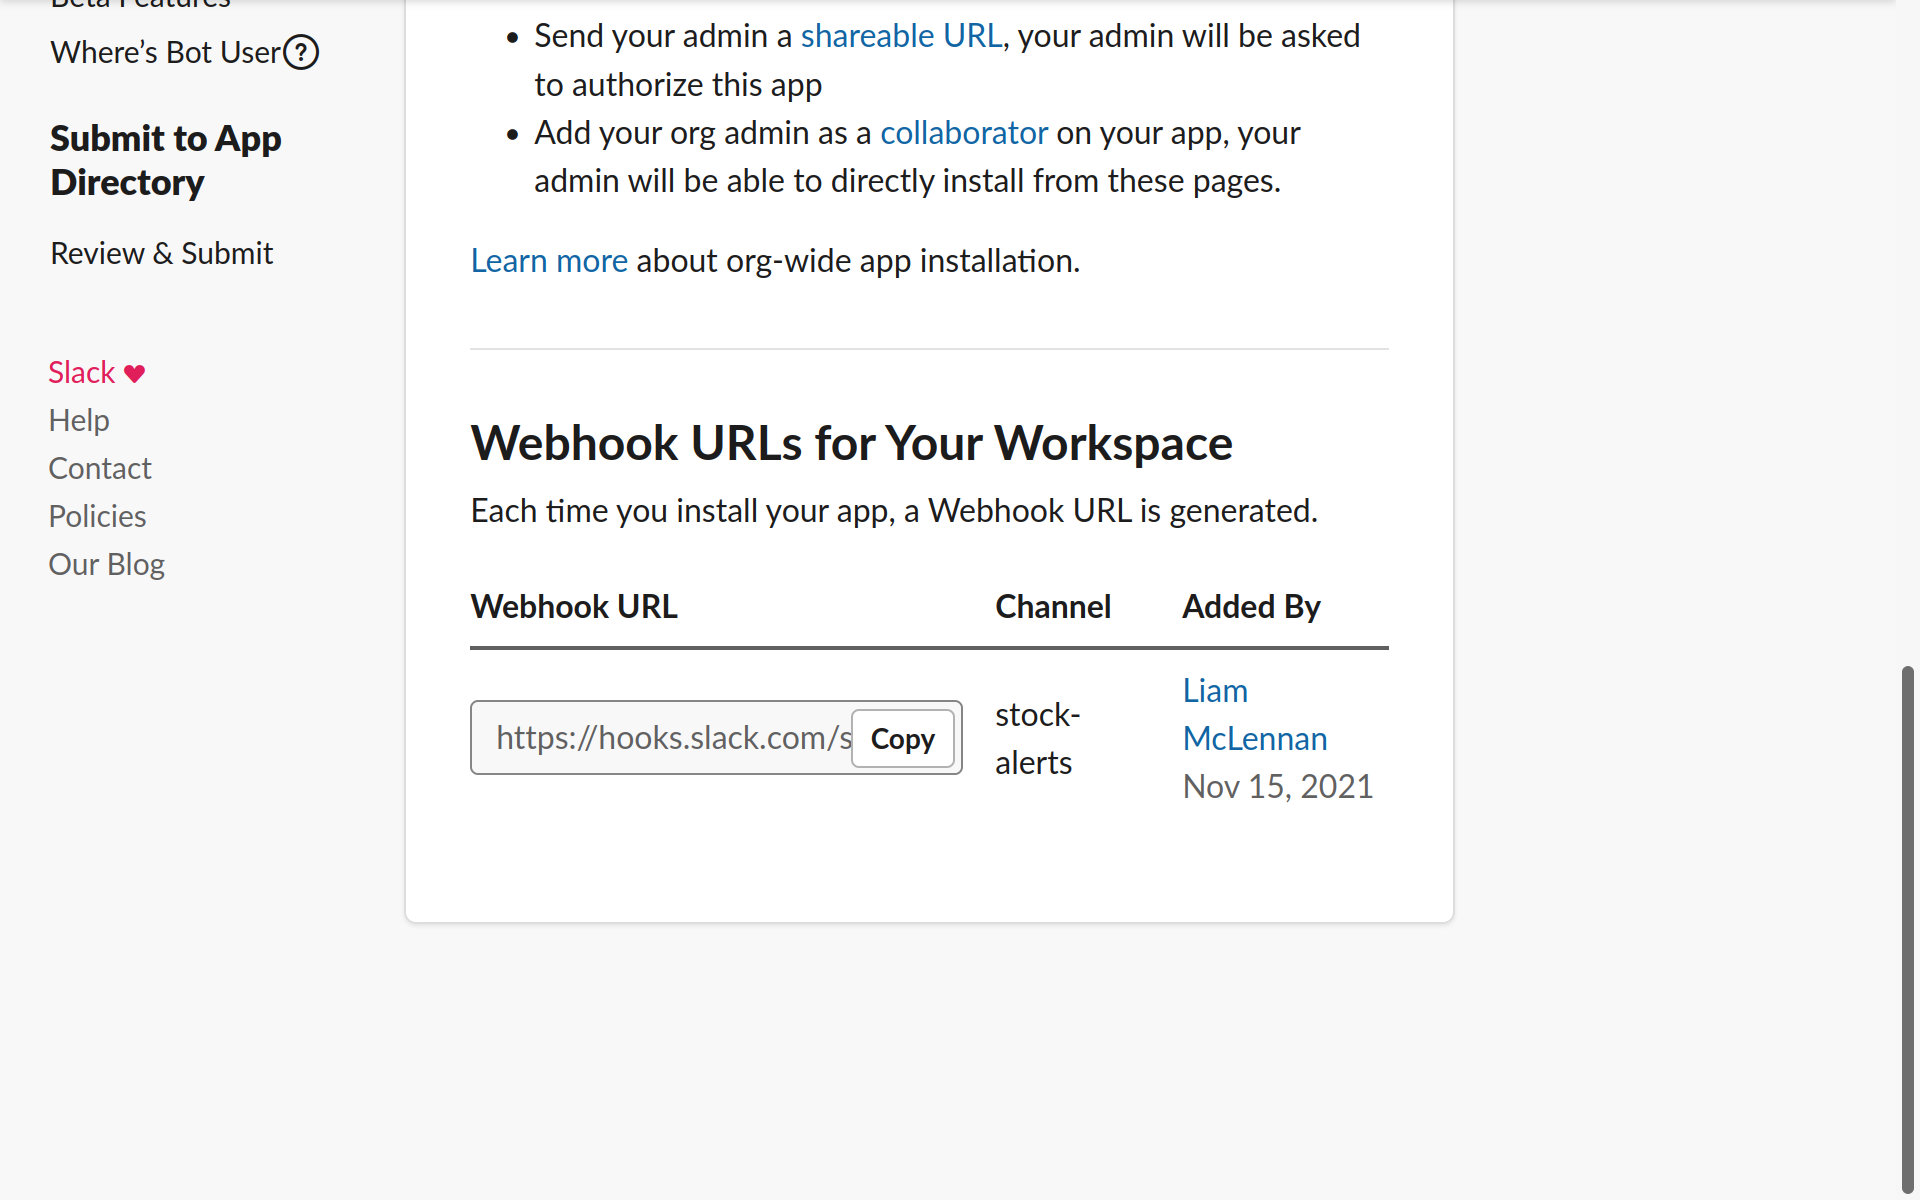 Slack Webhook configuration screen showing "Webhook URLs for Your Workspace", a URL, and a copy button.